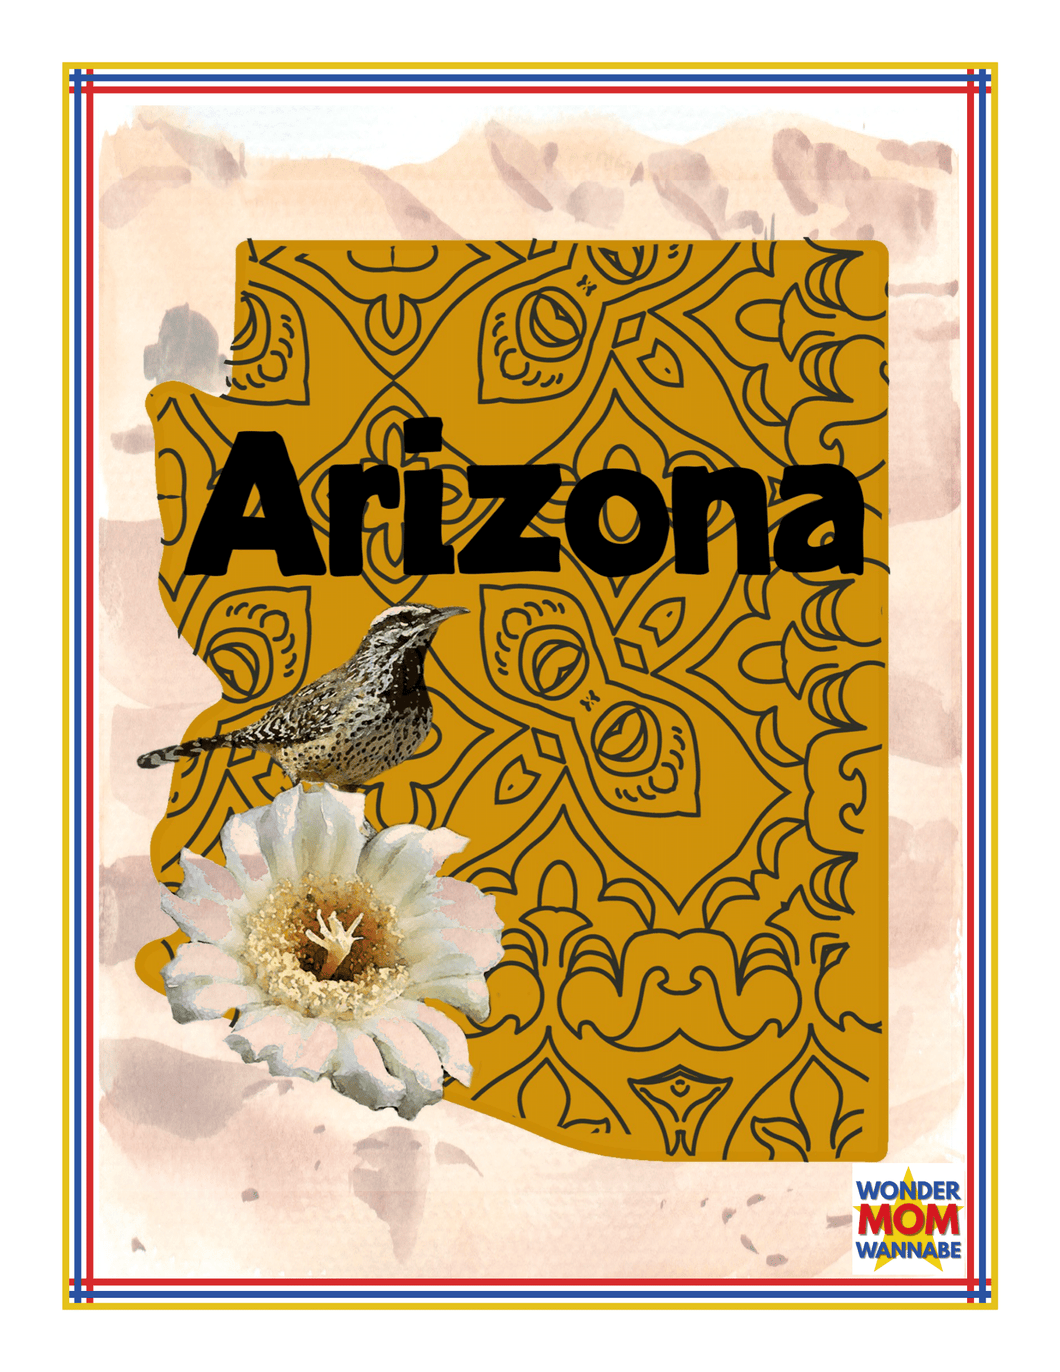 Arizona Travel Guide and Activity Kit for Kids